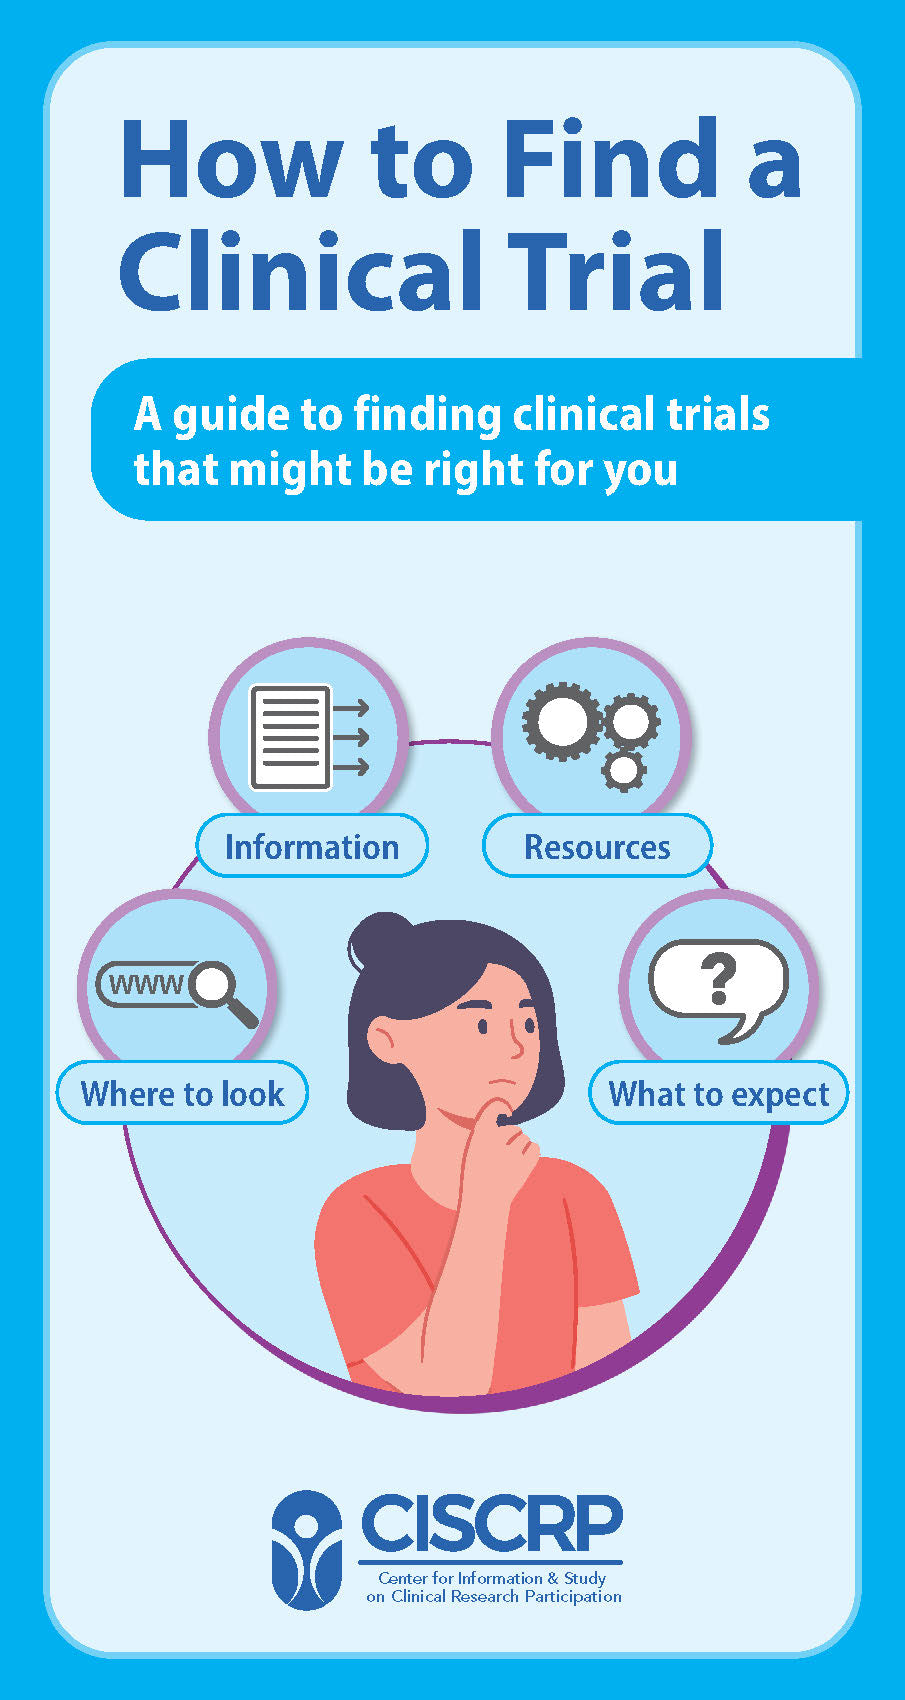 How to Find a Clinical Trial